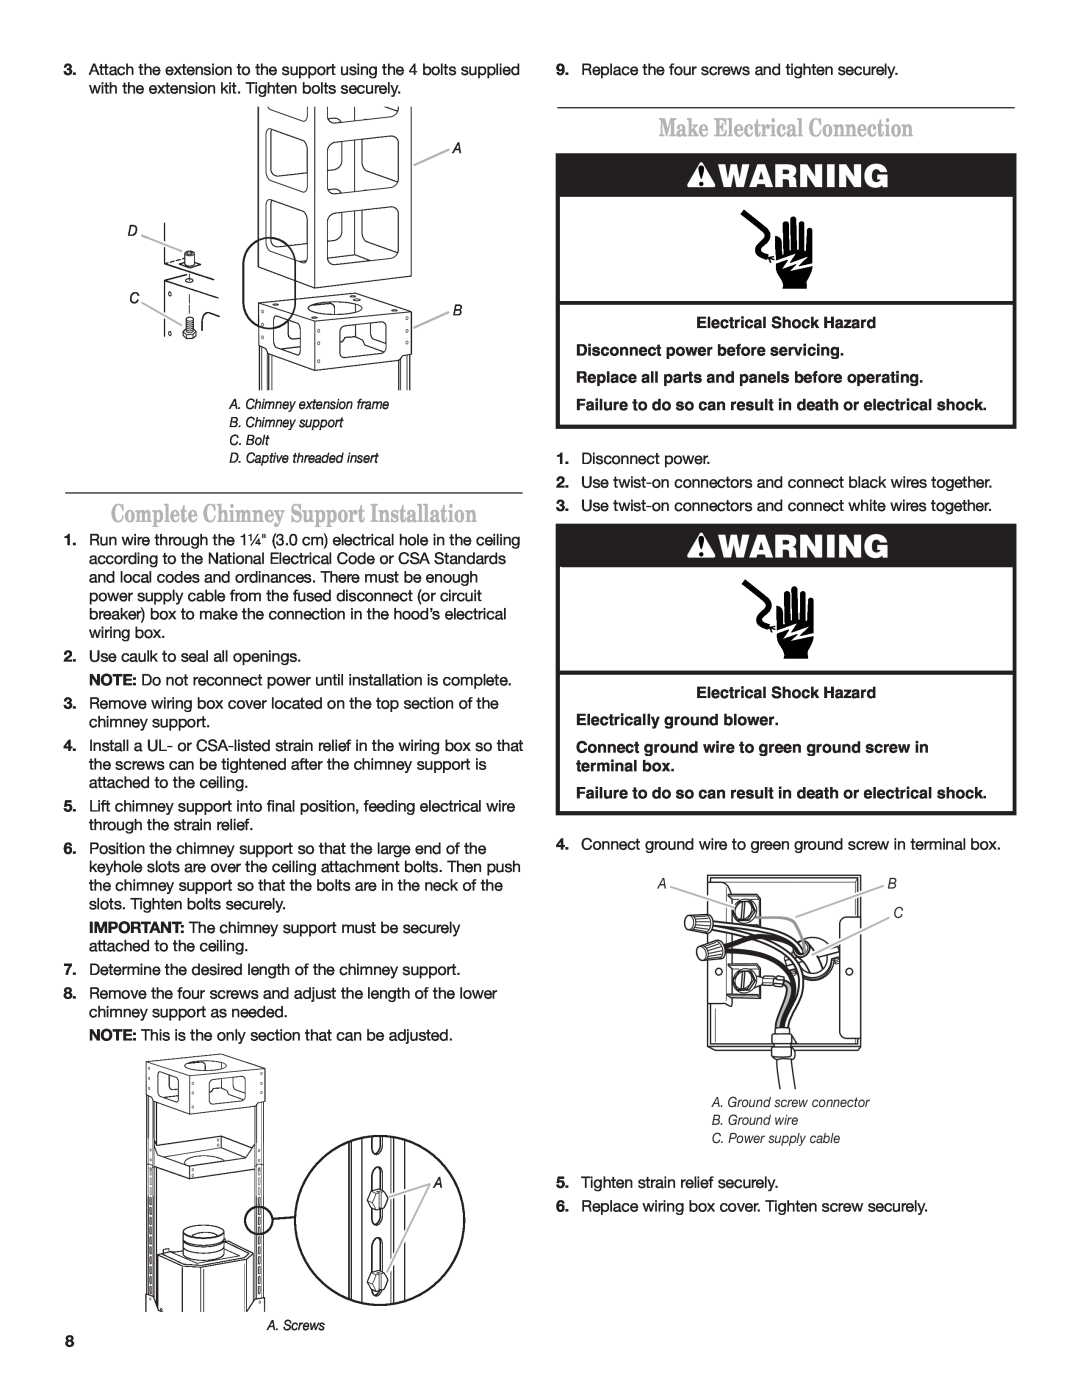 KitchenAid 9760425A Complete Chimney Support Installation, Make Electrical Connection, Tighten strain relief securely 